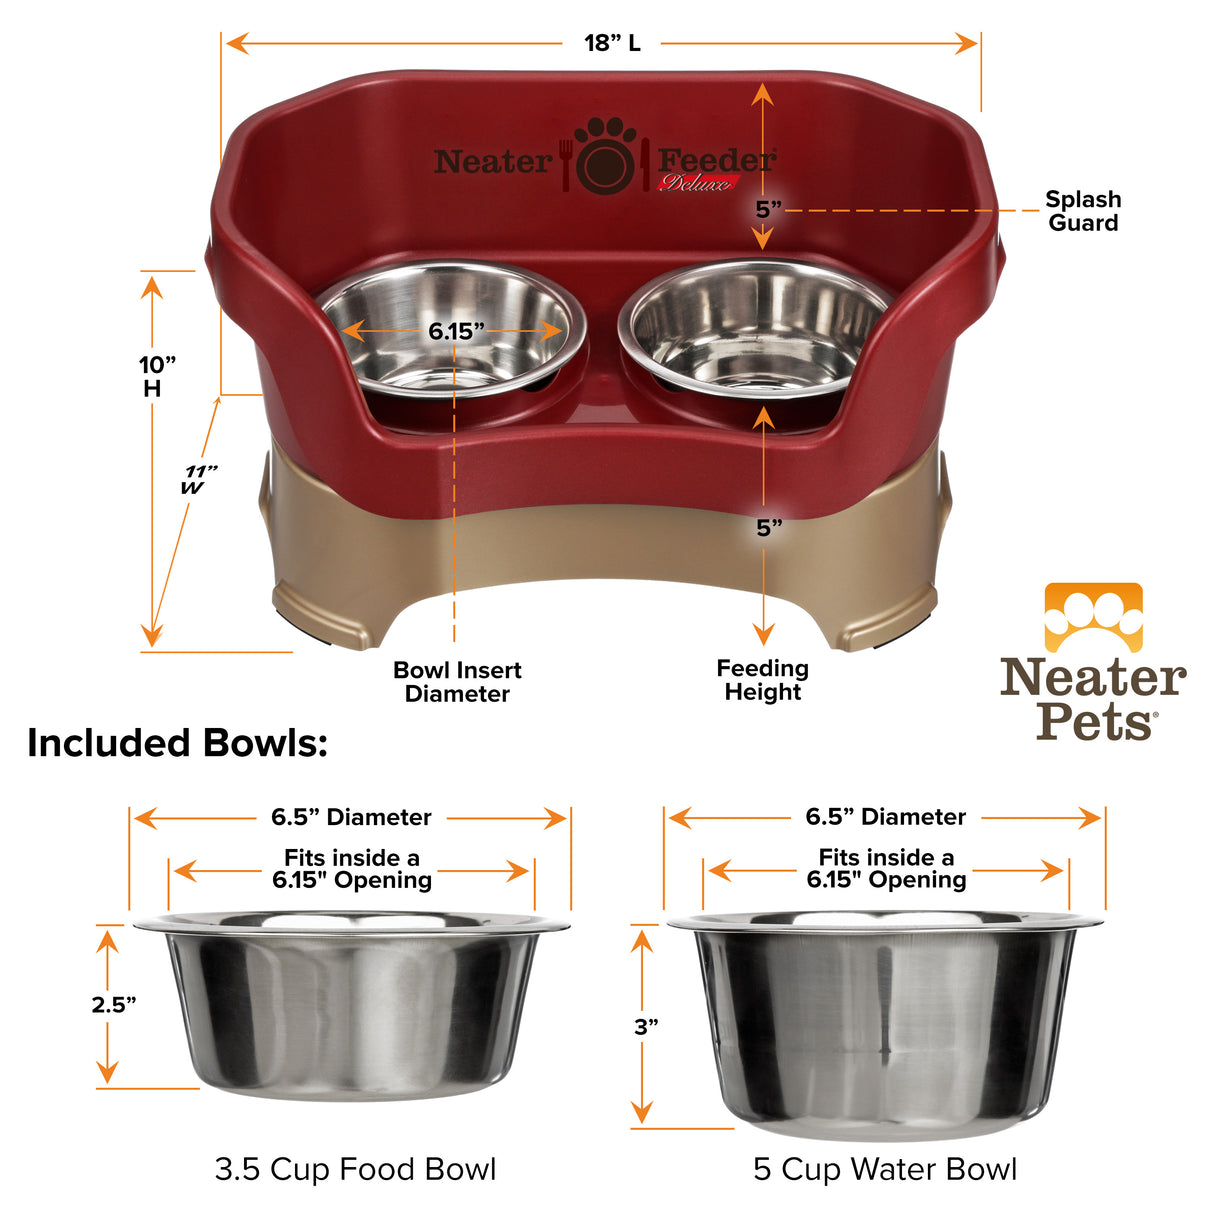 Deluxe Cranberry Medium Dog Neater Feeder and Bowl dimensions